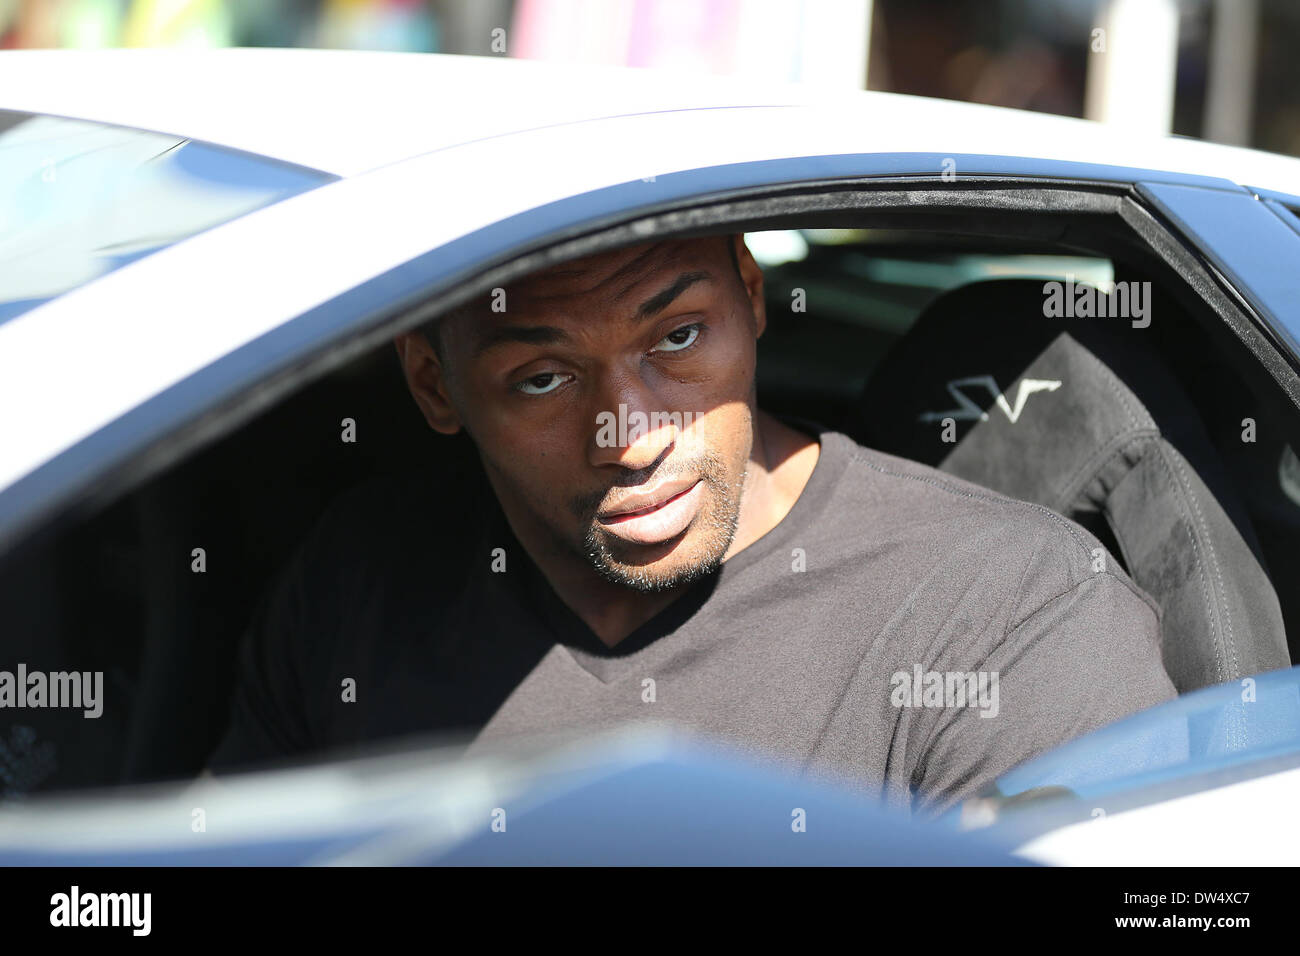 LA Laker, Ron Artest leaves Toast Bakery in West Hollywood after having lunch. Ron is wearing a Mr Pink Energy Drink T-shirt and drove to the restaurant in his Lamborghini. Los Angeles, California - 08.10.12 Where: United States When: 08 Oct 2012 Stock Photo